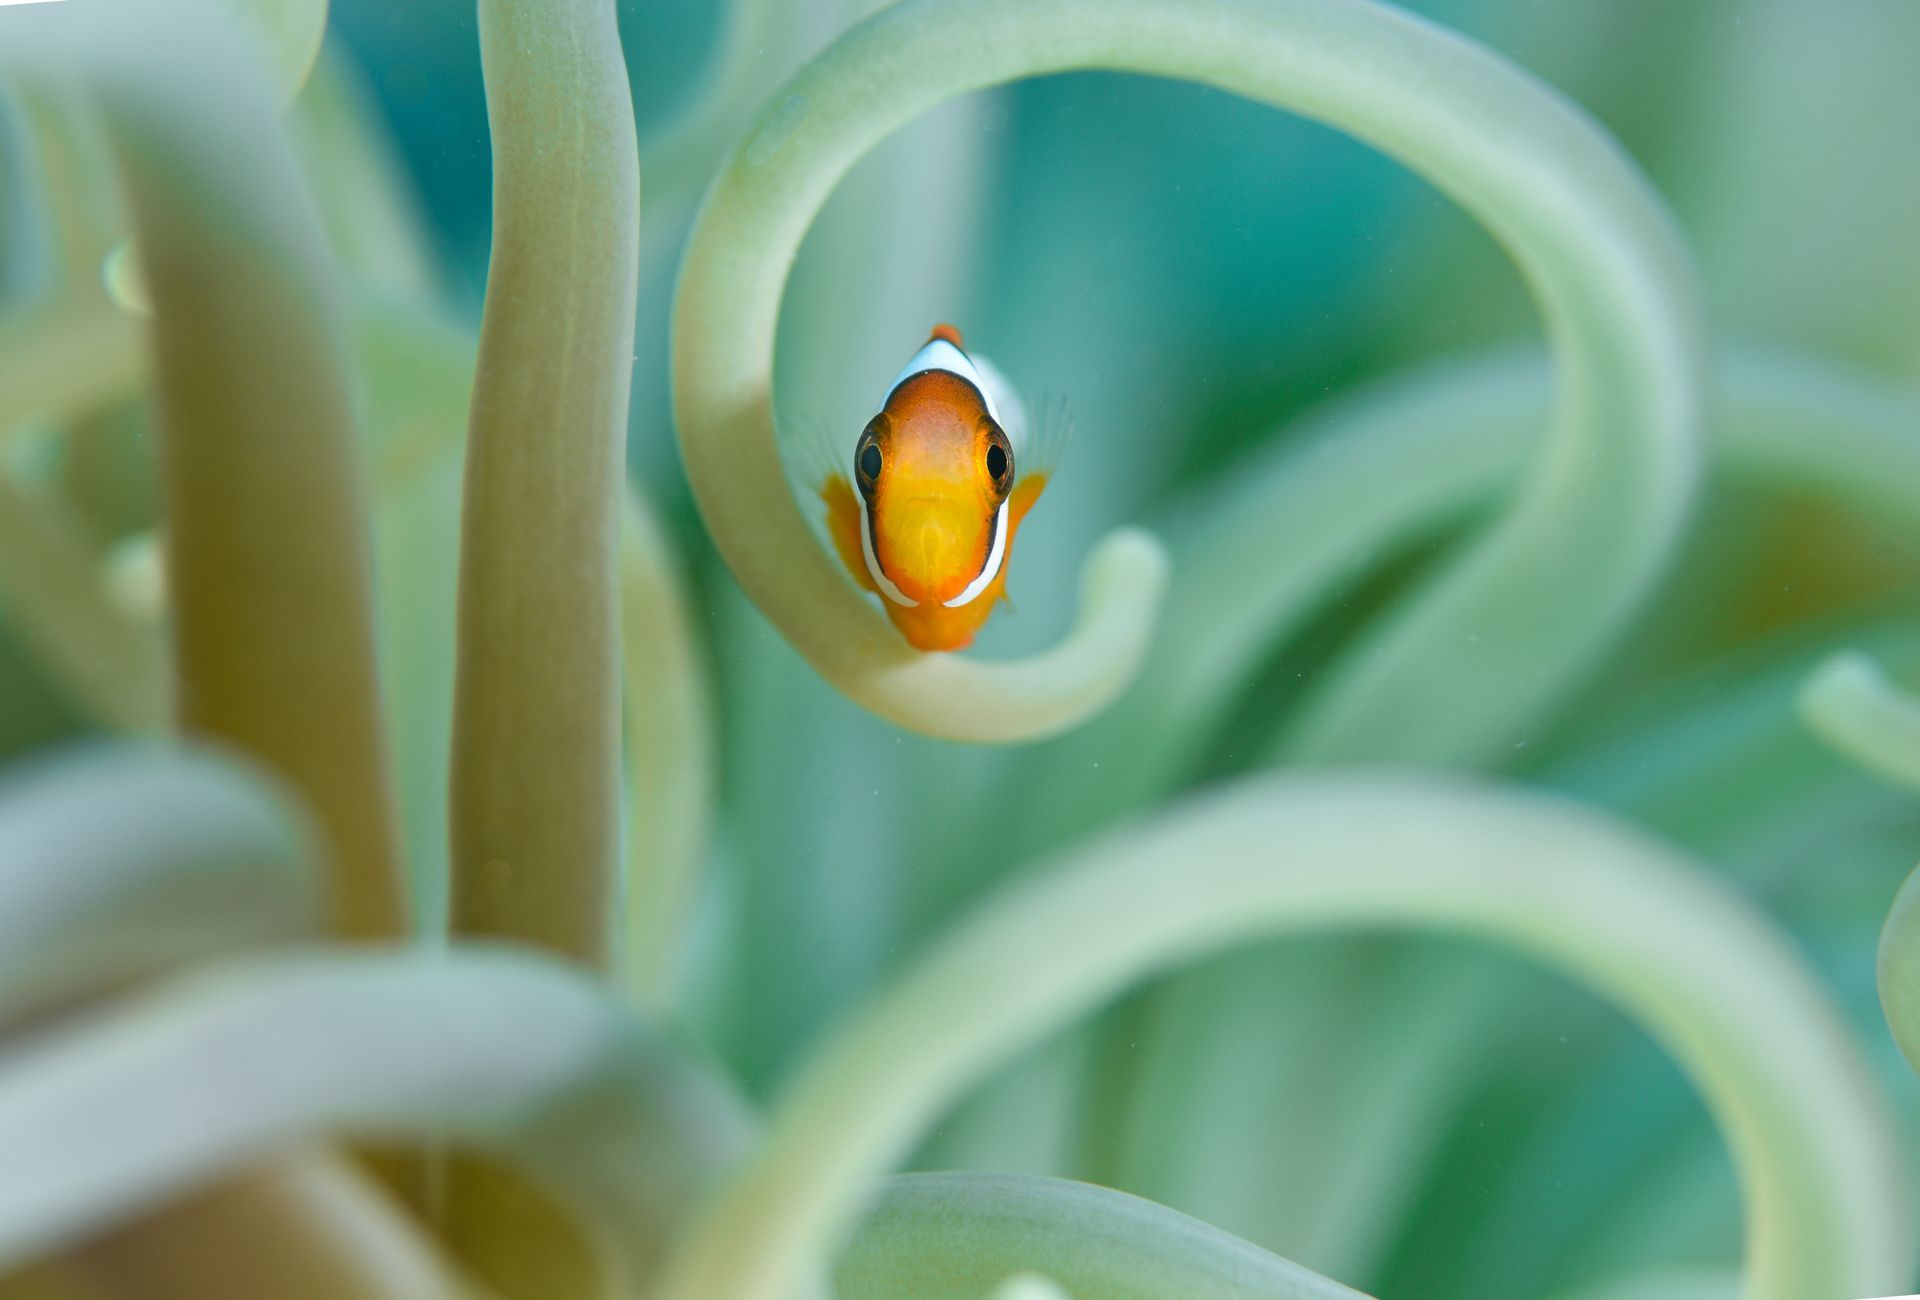 A tiny orange clownfish facing the camera amid the tentacles of a blue and white anemone